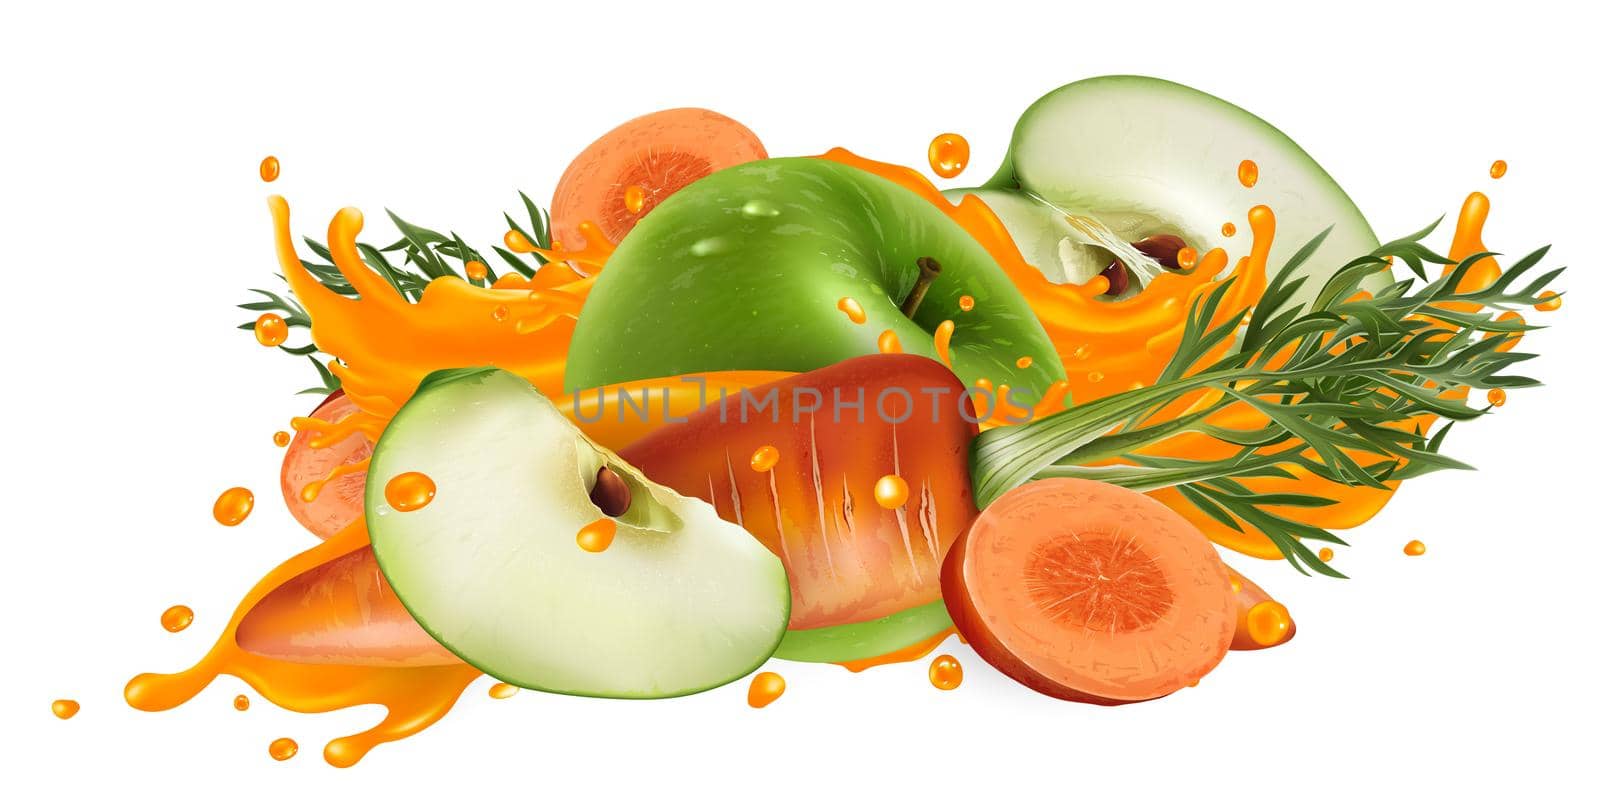 Fresh carrots and green apples and a splash of vegetable juice on a white background. Realistic style illustration.